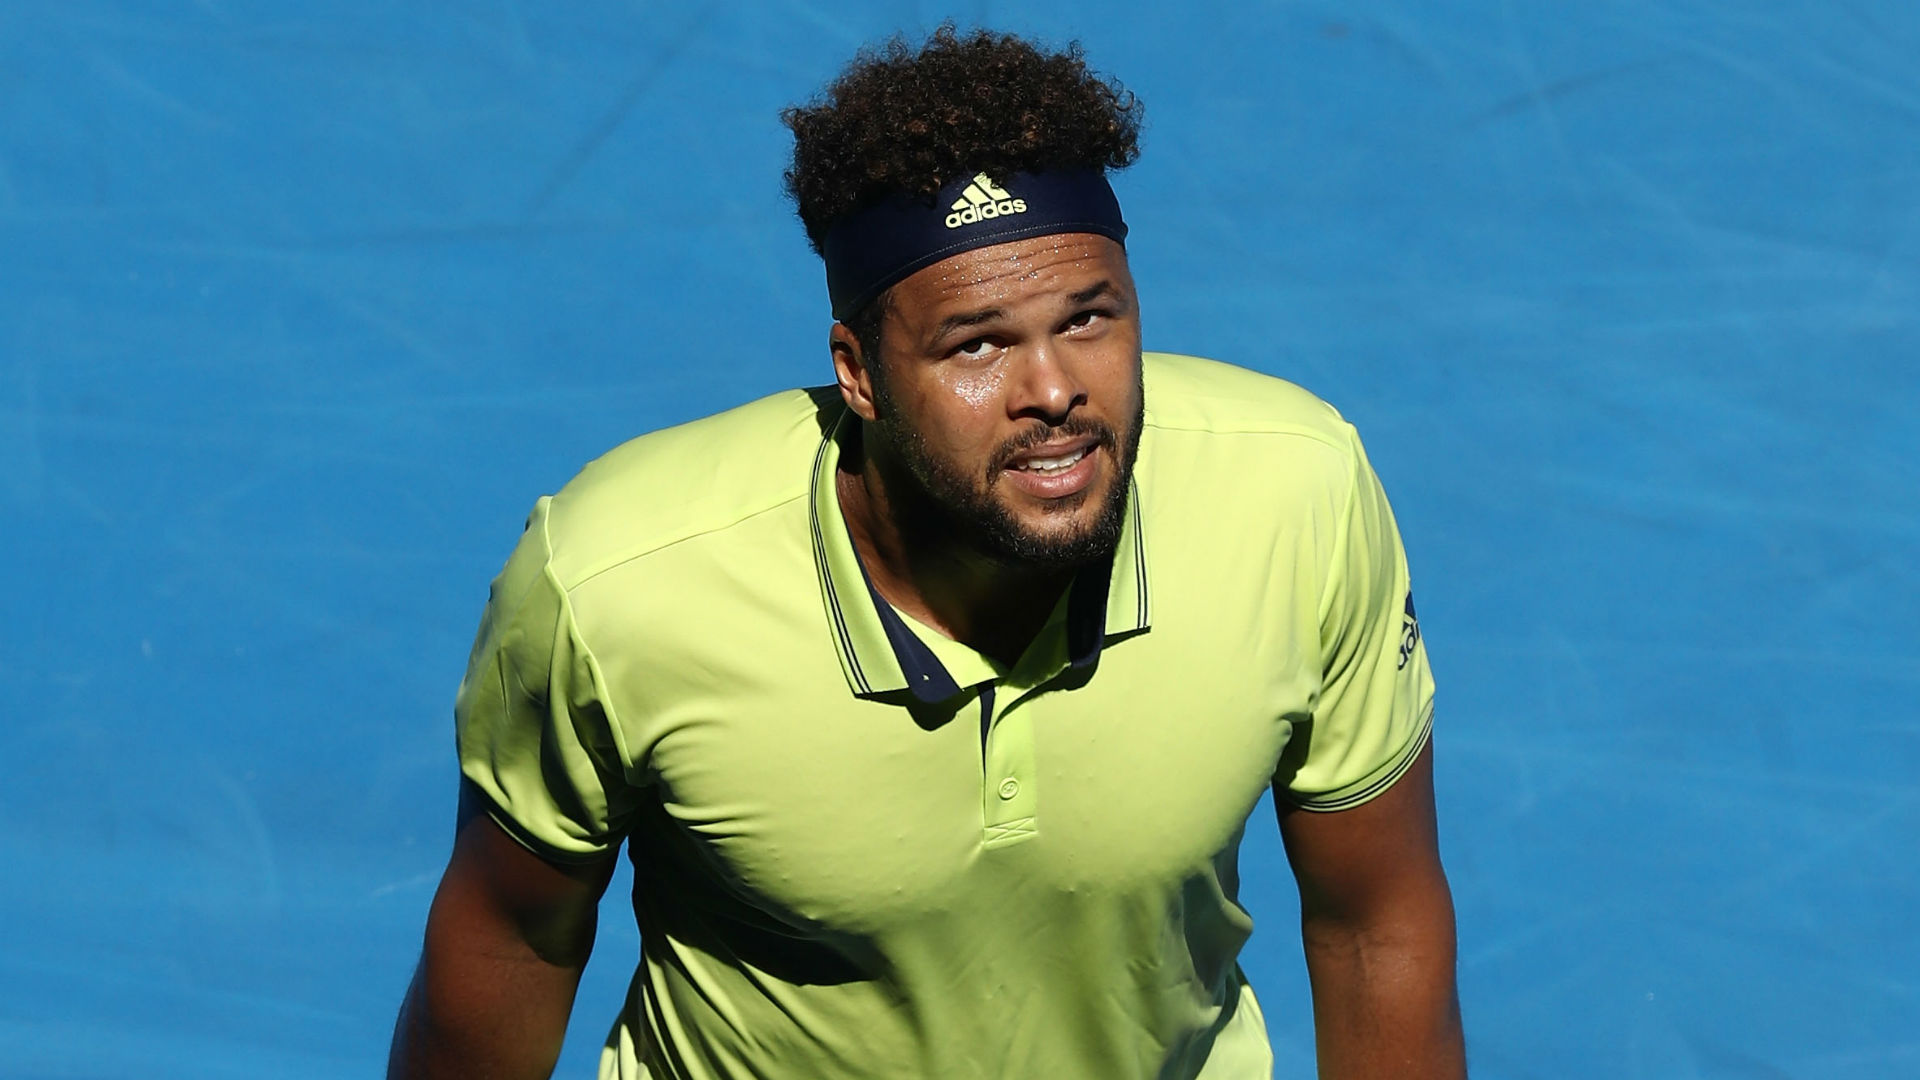 Jo-Wilfried Tsonga has fallen to 259 in the world rankings and has hired Sergi Bruguera as he bids to rediscover his fitness and form.